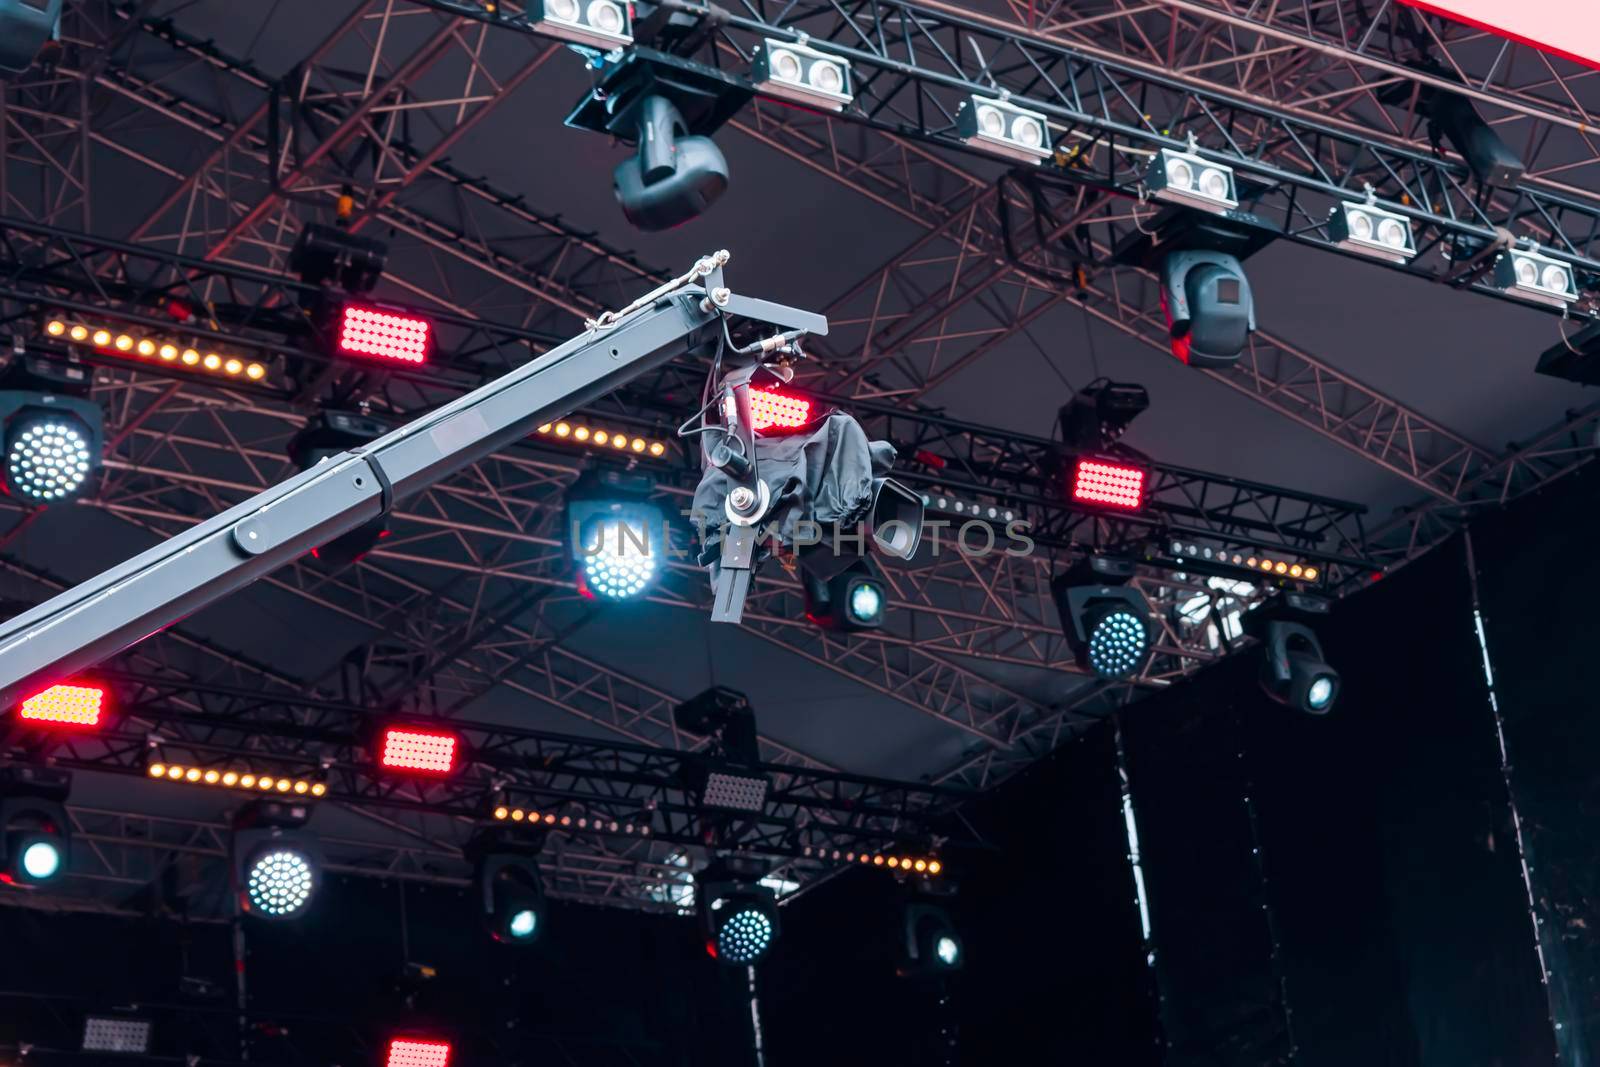 Video camera on the background of the stage spotlights of the music show by Skaron